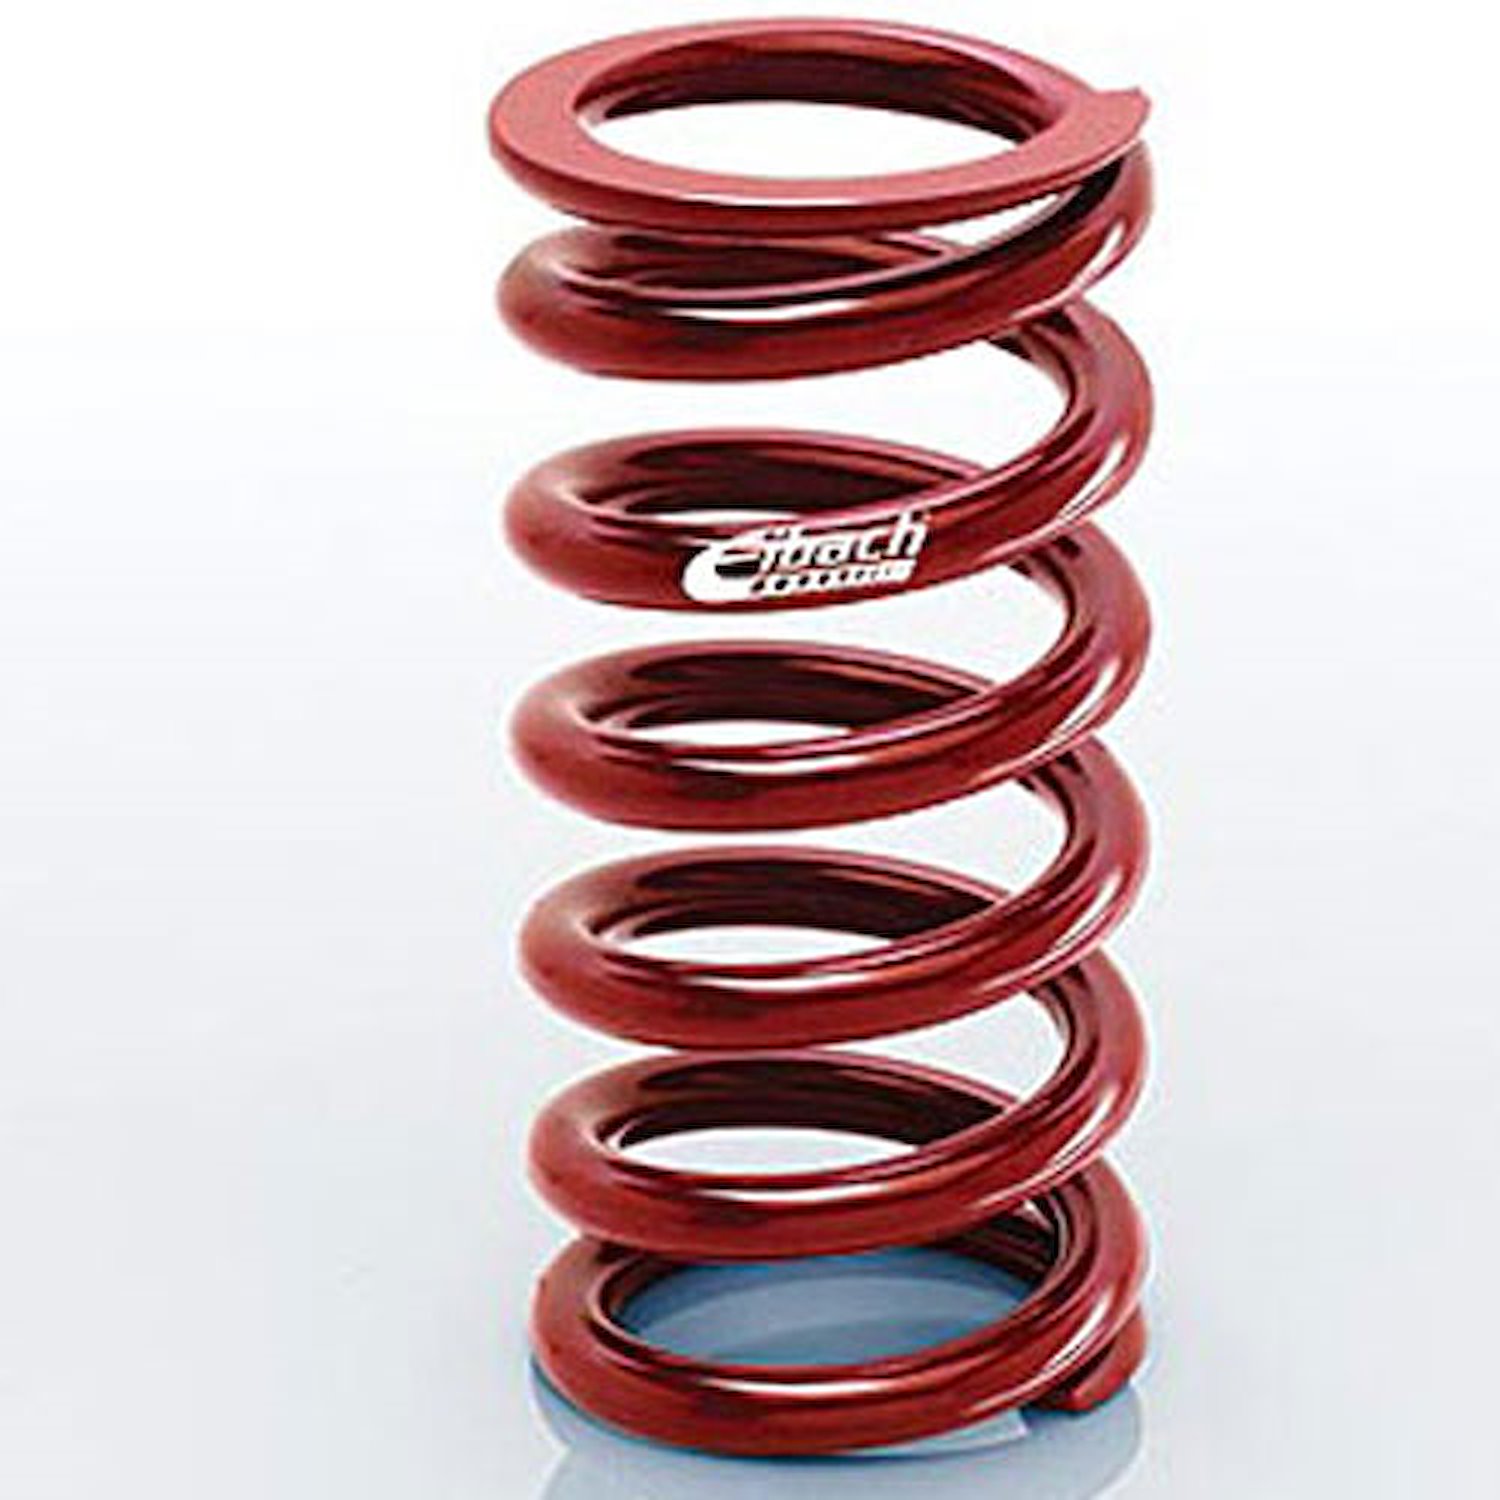 0950.500.0750 EIBACH CONVENTIONAL FRONT SPRING